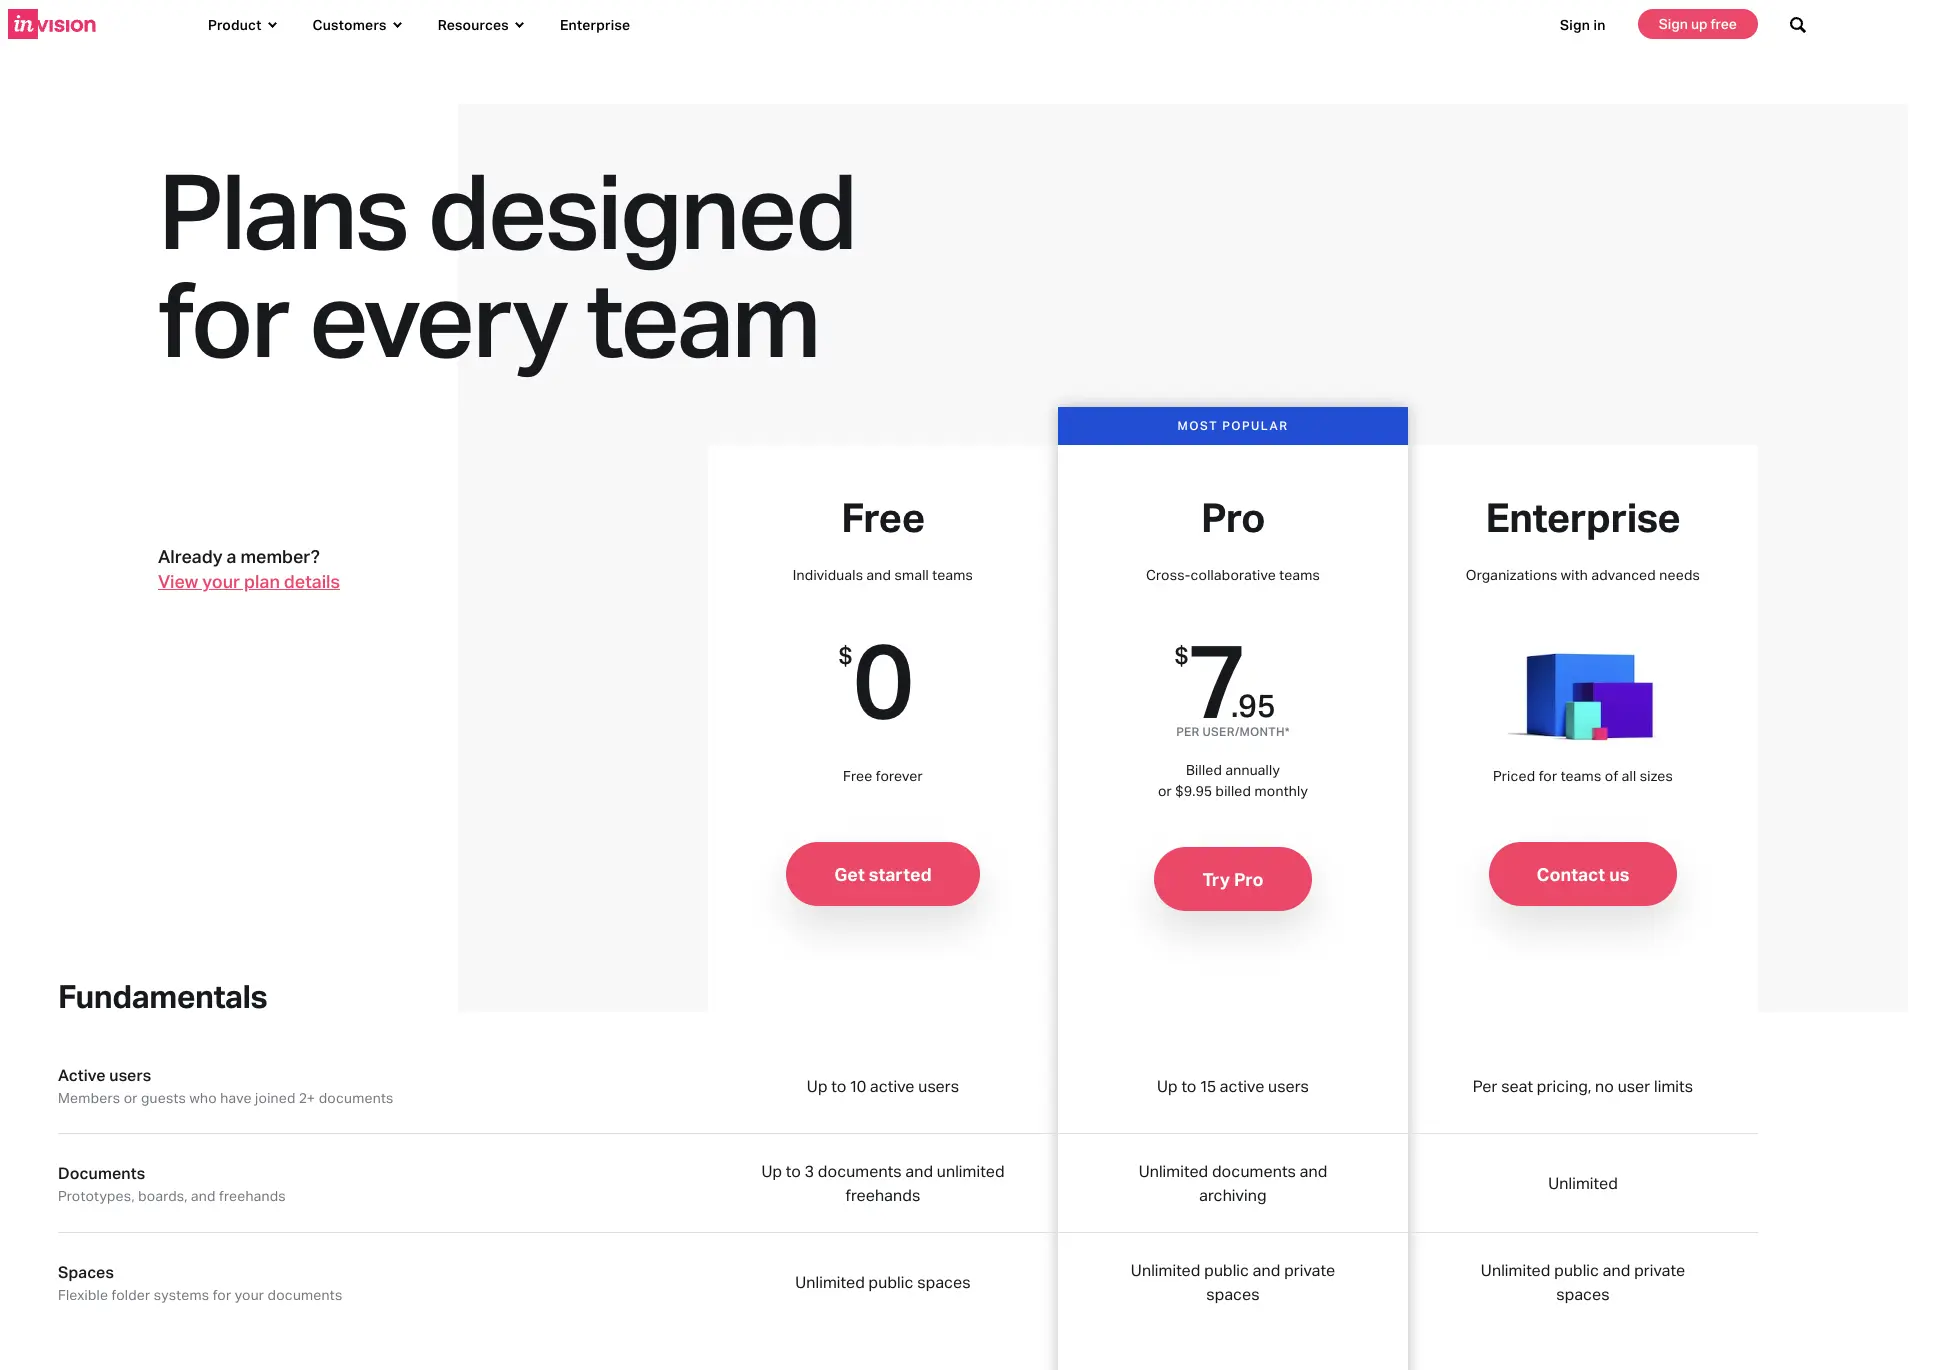 Is InVision Free?